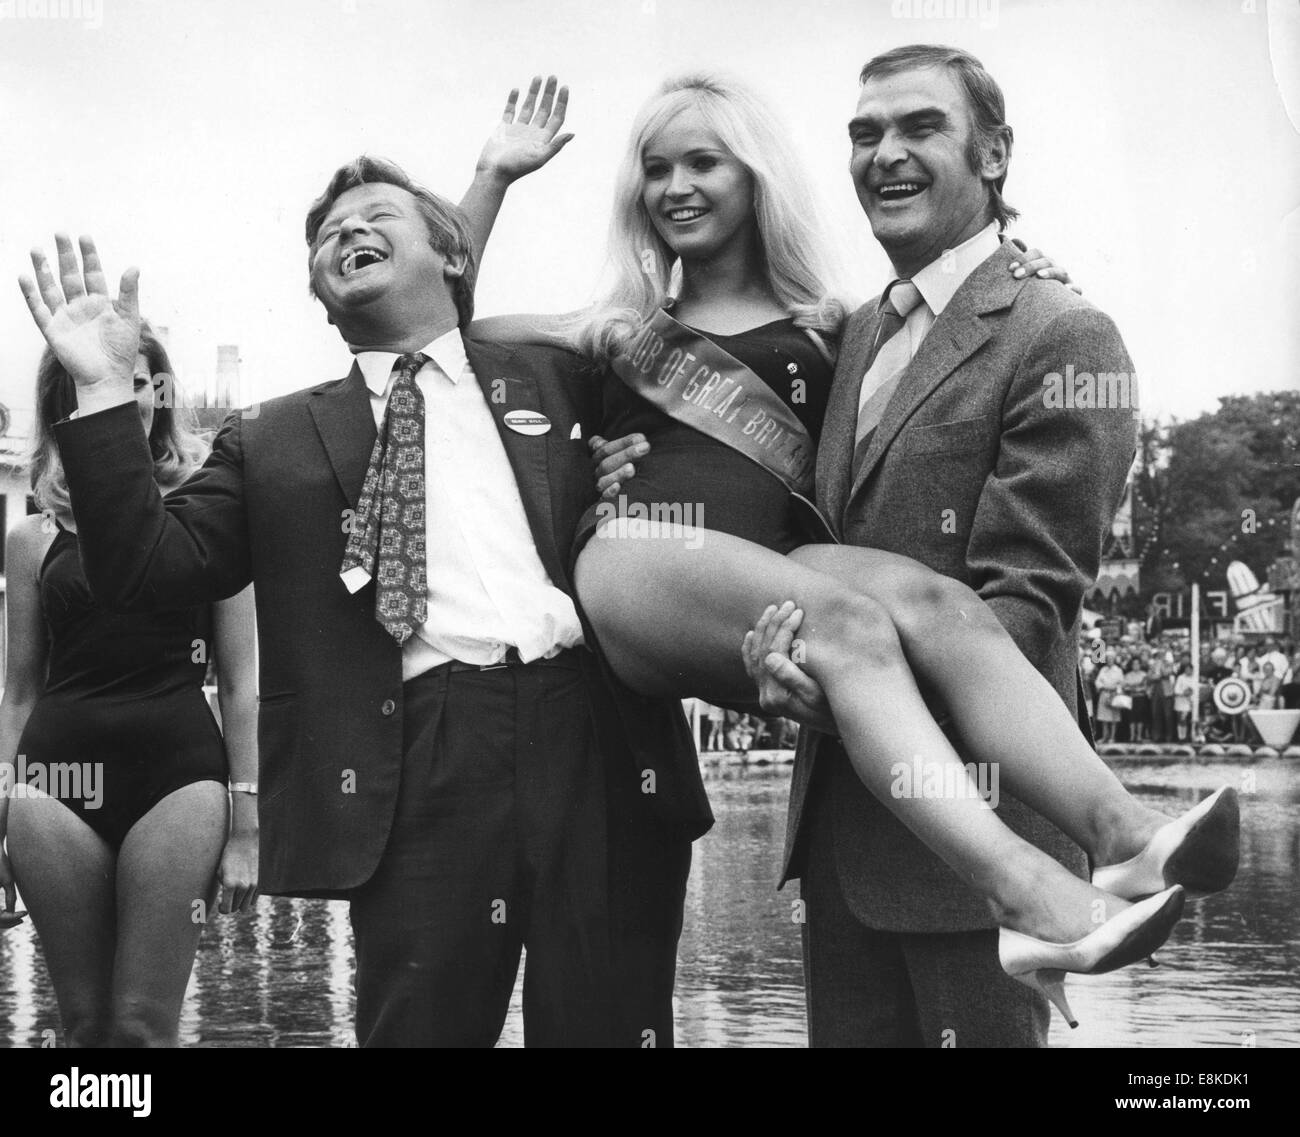 April 20, 1992 - BENNY HILL, aka ALFRED HAWTHORNE HILL (January 21, 1924 - April 20, 1992) was an English comedian and actor, notable for his long-running television program The Benny Hill Show. PICTURED: May 30, 1970 - London, England, United Kingdom - MARILYN WARD, the winner of the Miss Variety Club of Great Britain 1970 bathing beauty competition is held up by English comedian BENNY HILL (1924-1992) and Welsh actor STANLEY BAKER (1928-1976) at London Festival Pleasure Gardens during the Variety Club's gala. © KEYSTONE Pictures/ZUMA Wire/ZUMAPRESS.com/Alamy Live News Stock Photo